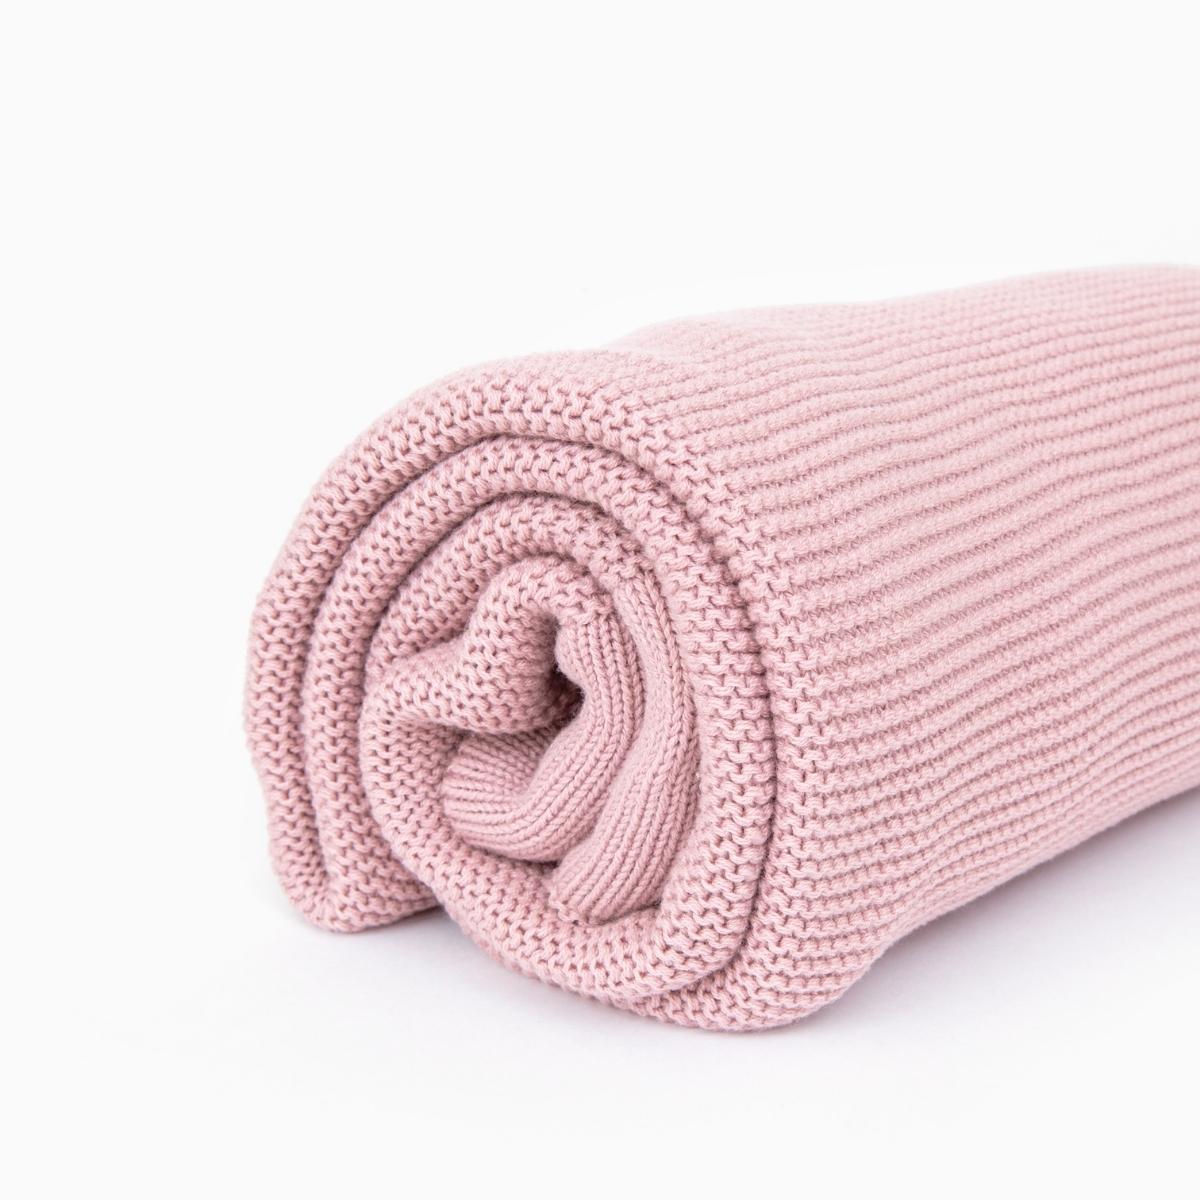 Blush Pink Personalised Knitted Blanket